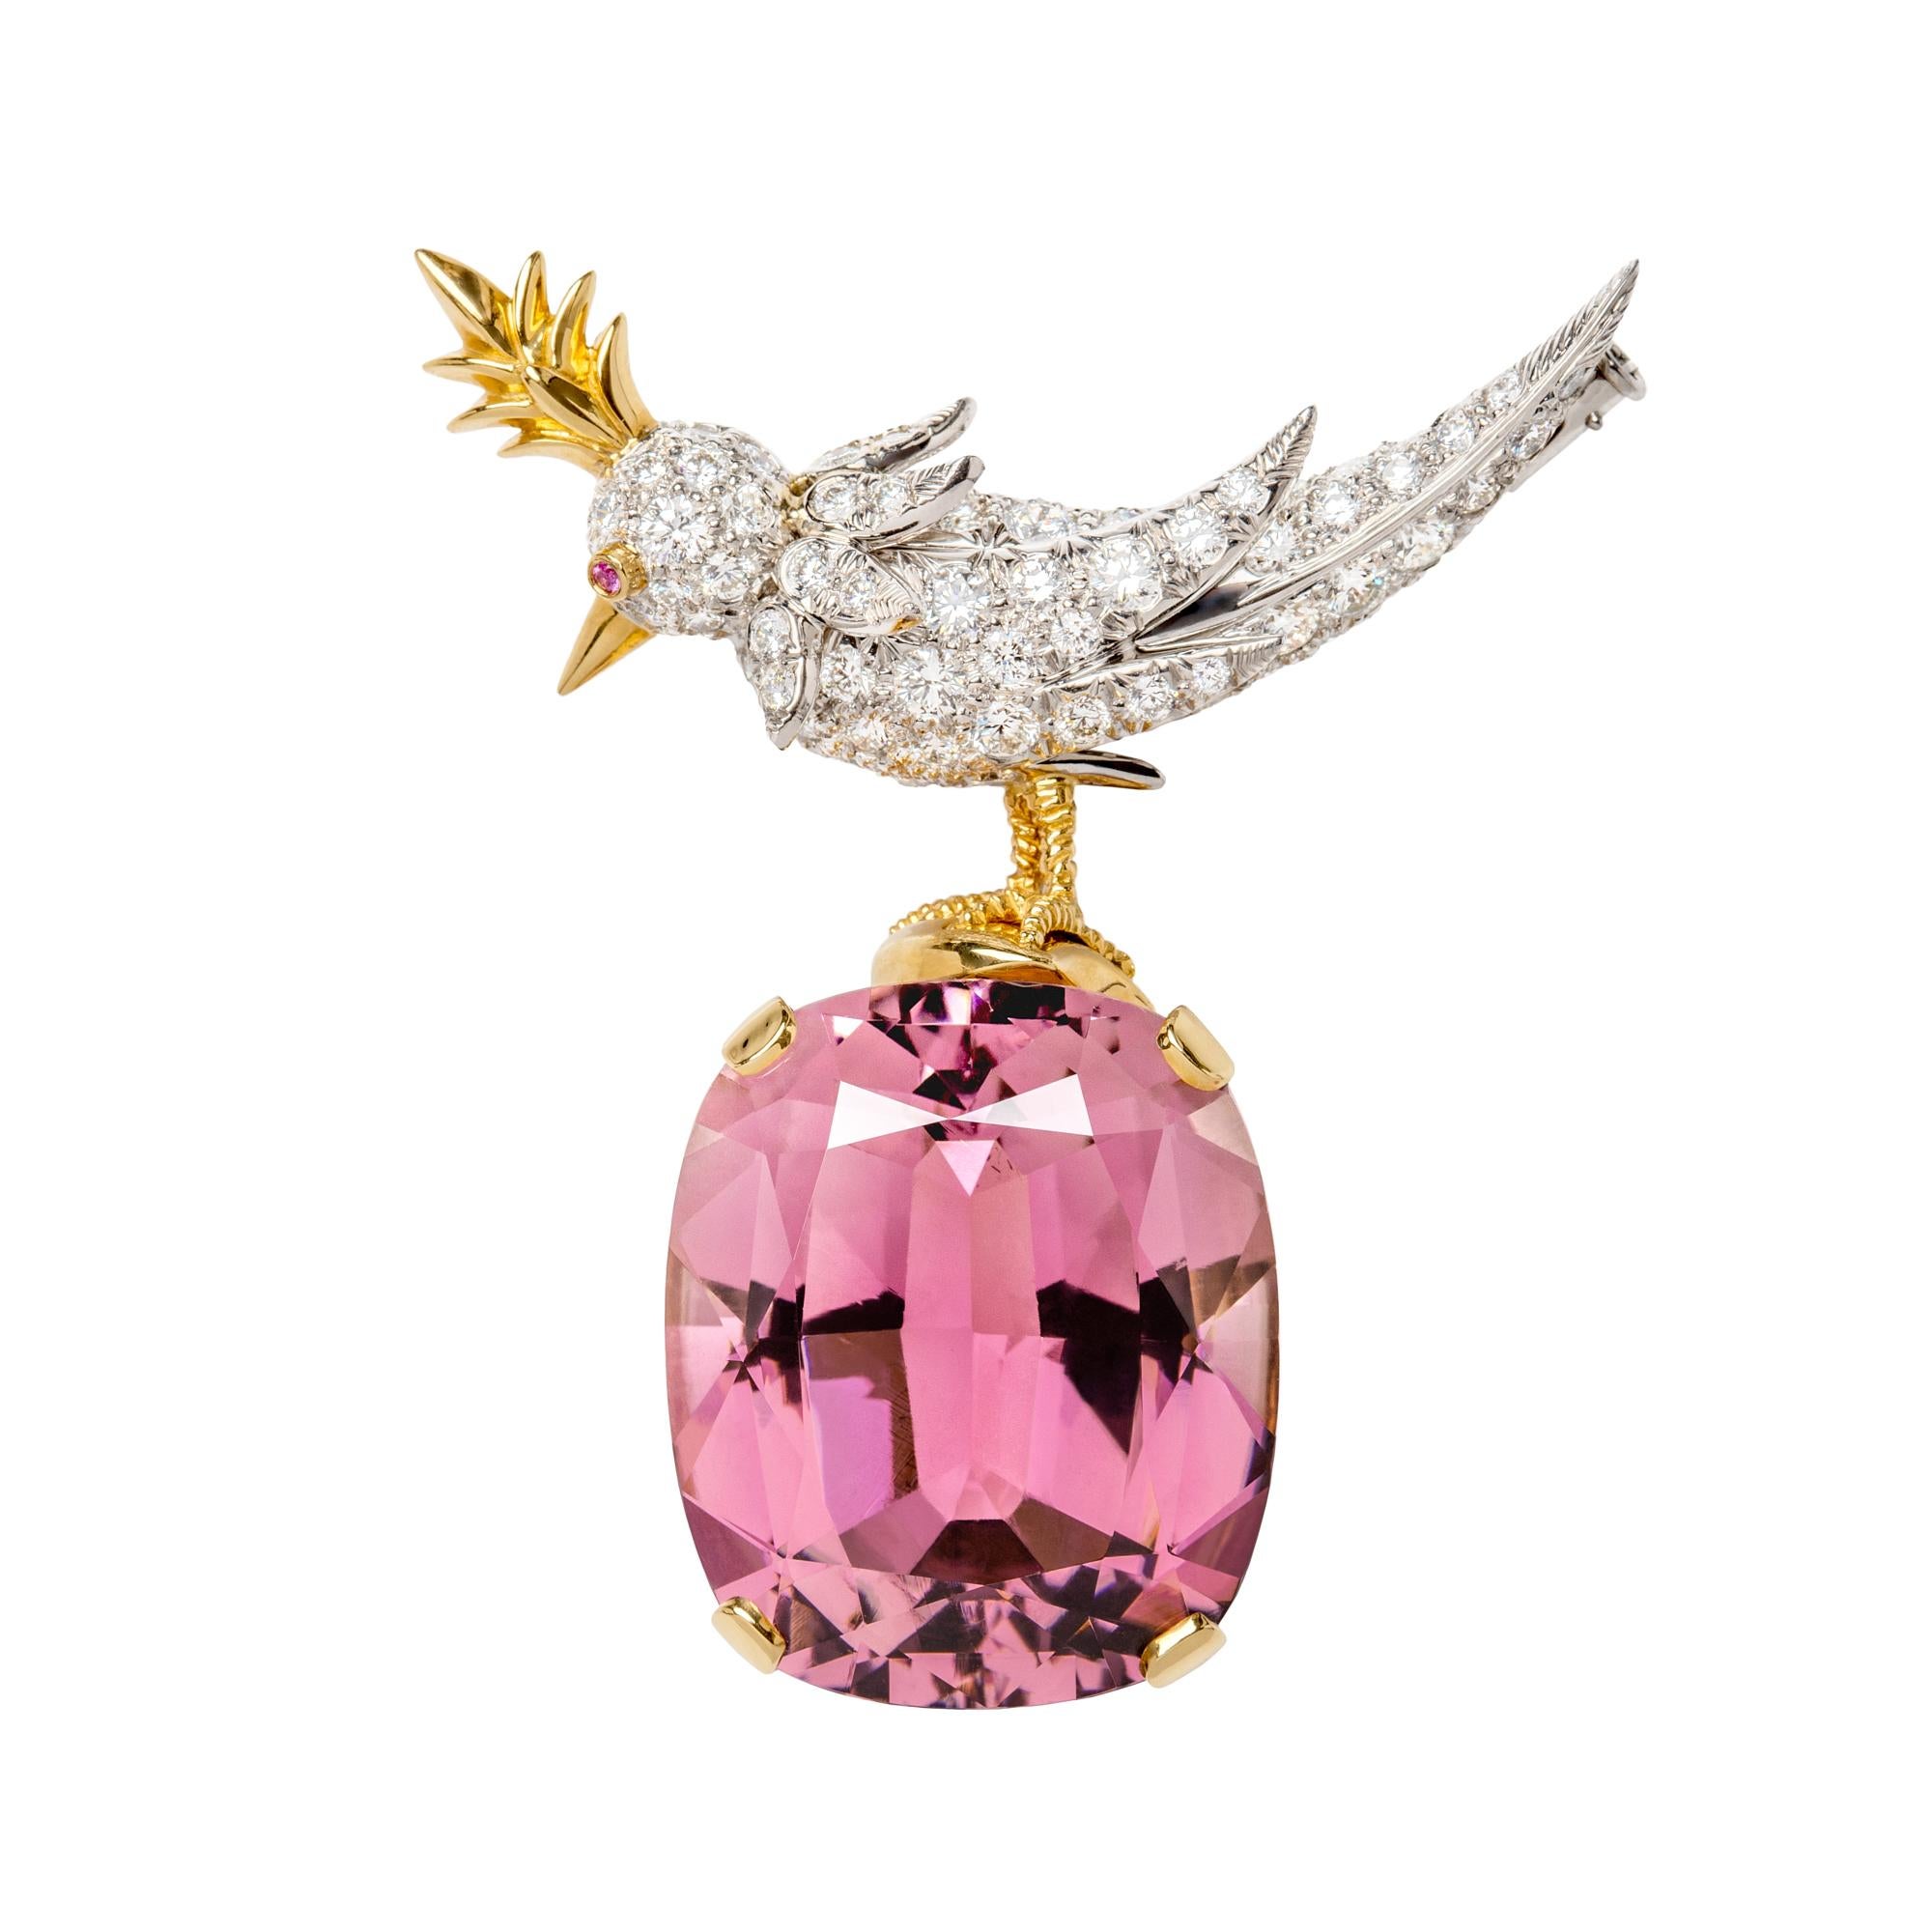 Jean Schlumberger for Tiffany & Co. 

Jean Schlumberger was one of only five designers, and the first, to sign his name to the pieces he created for Tiffany & Co. One of his most appealing and enduring pieces is the Bird on a Rock brooch, designed